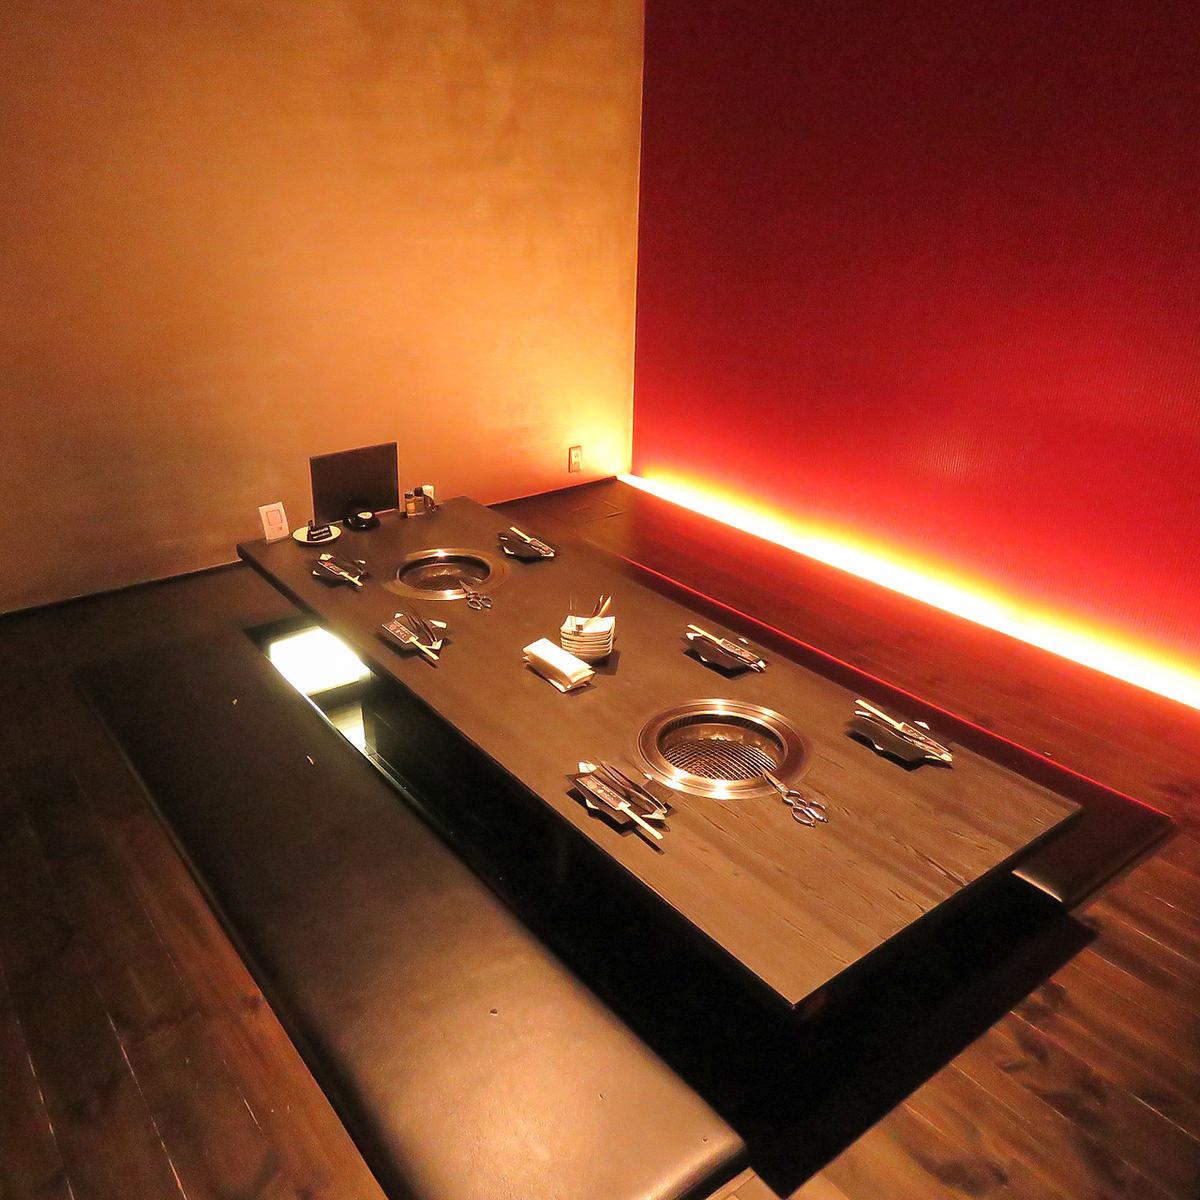 Equipped with a private room with a popular sunken kotatsu! The store has a calm atmosphere♪